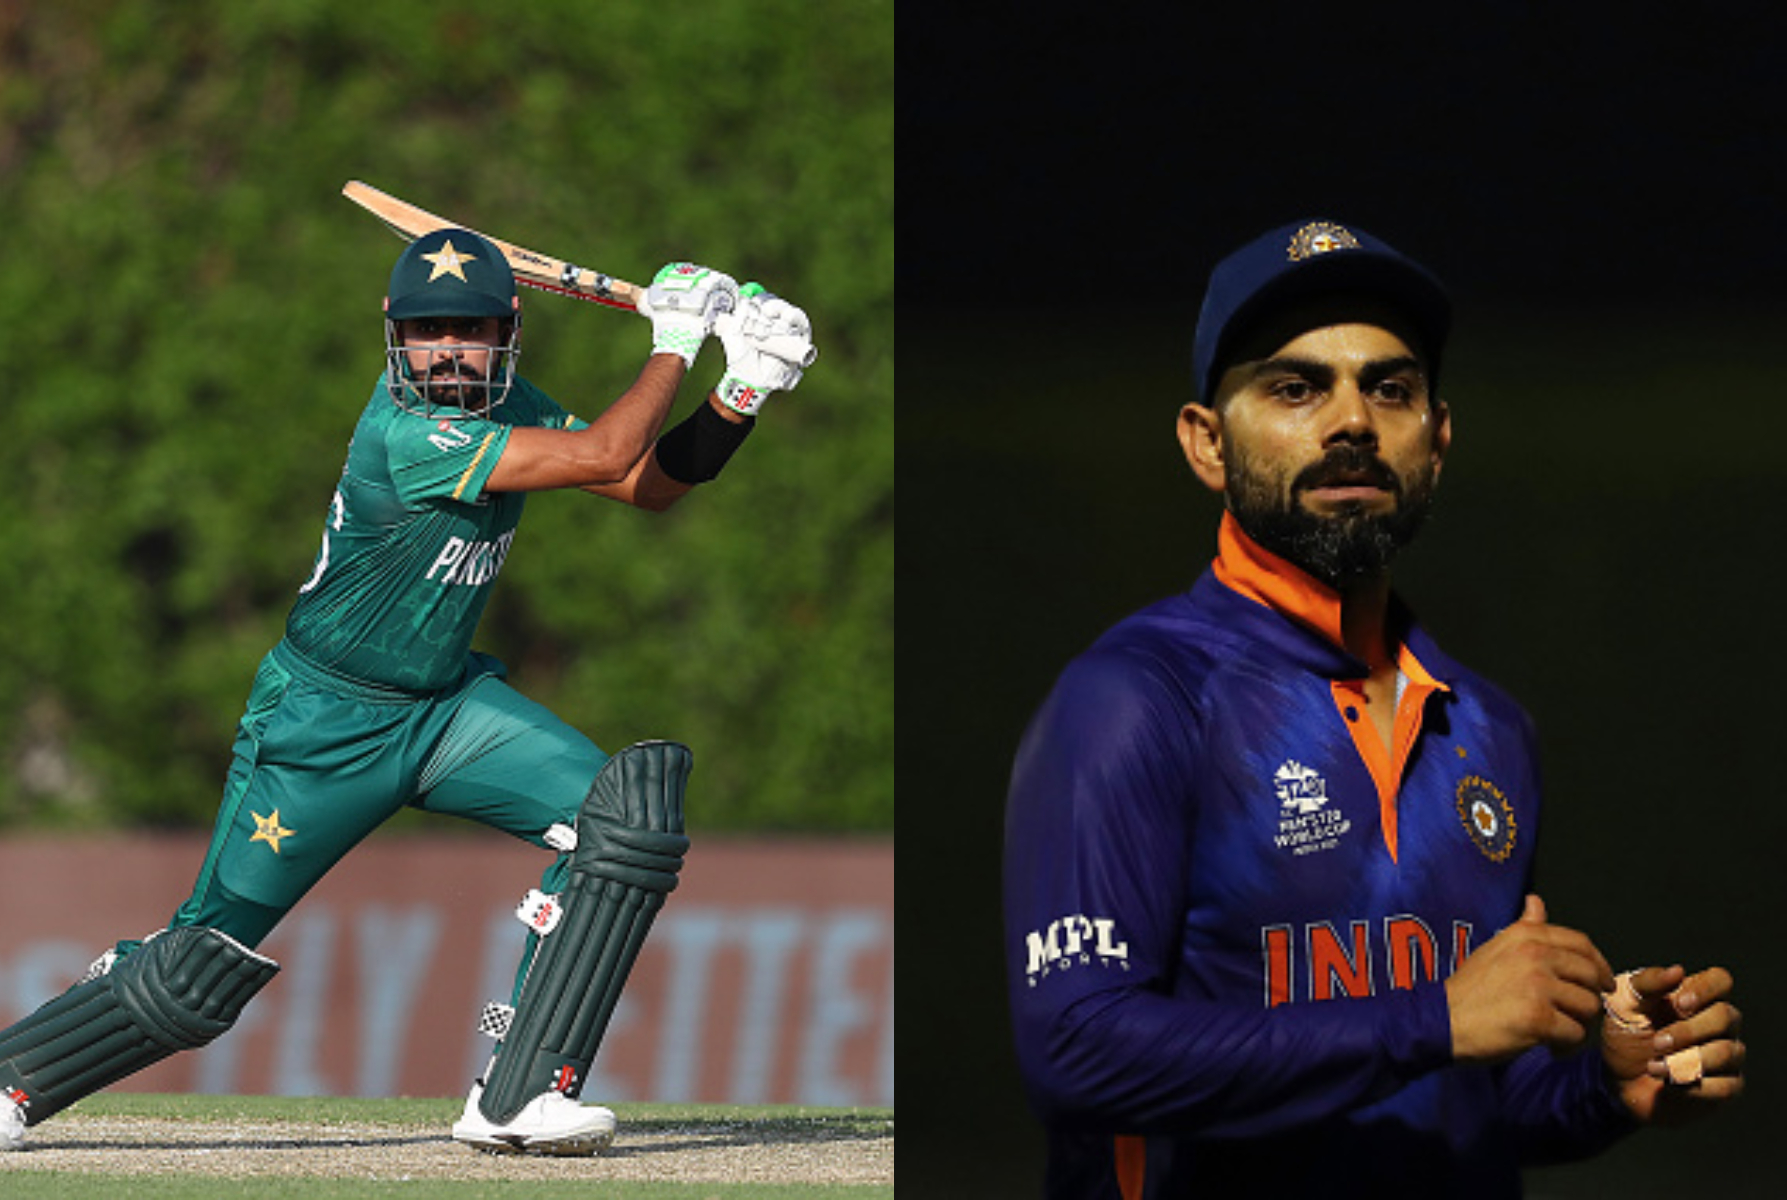 India and Pakistan will clash in T20 WC 2021 on Oct 24 in Dubai | Getty